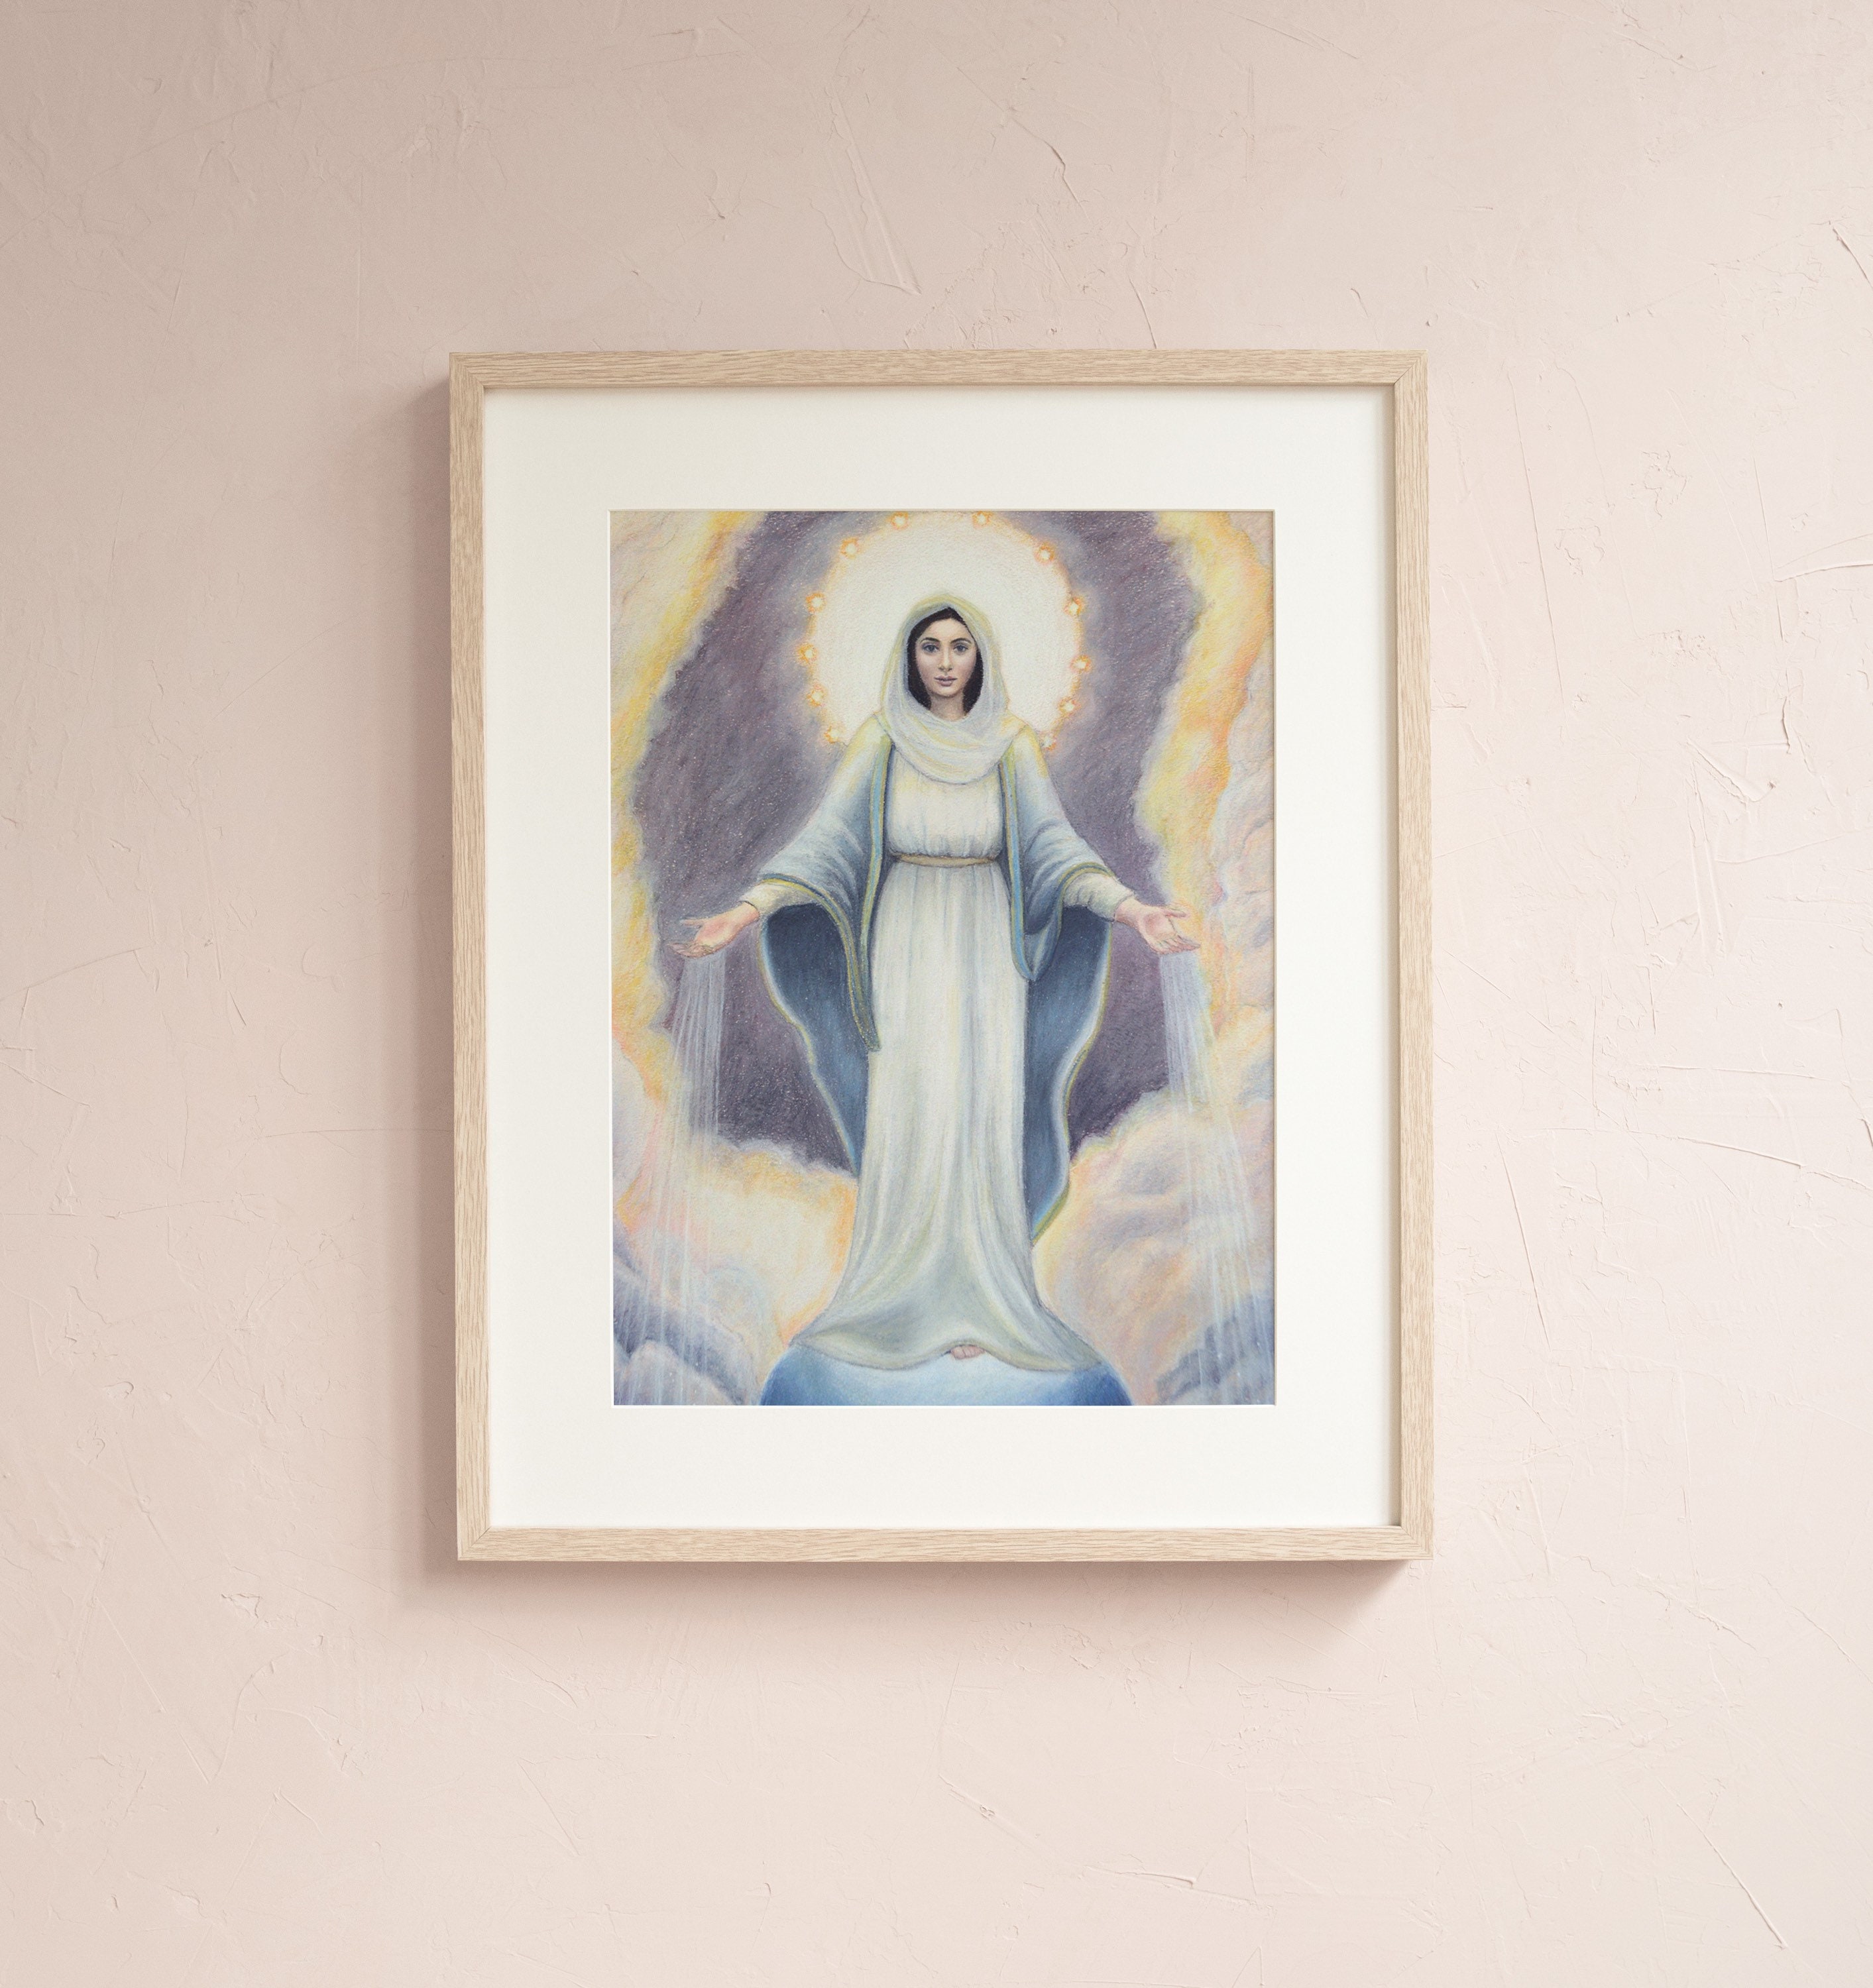 134 Frame Our Lady of Grace 12x16 Framed Canvas